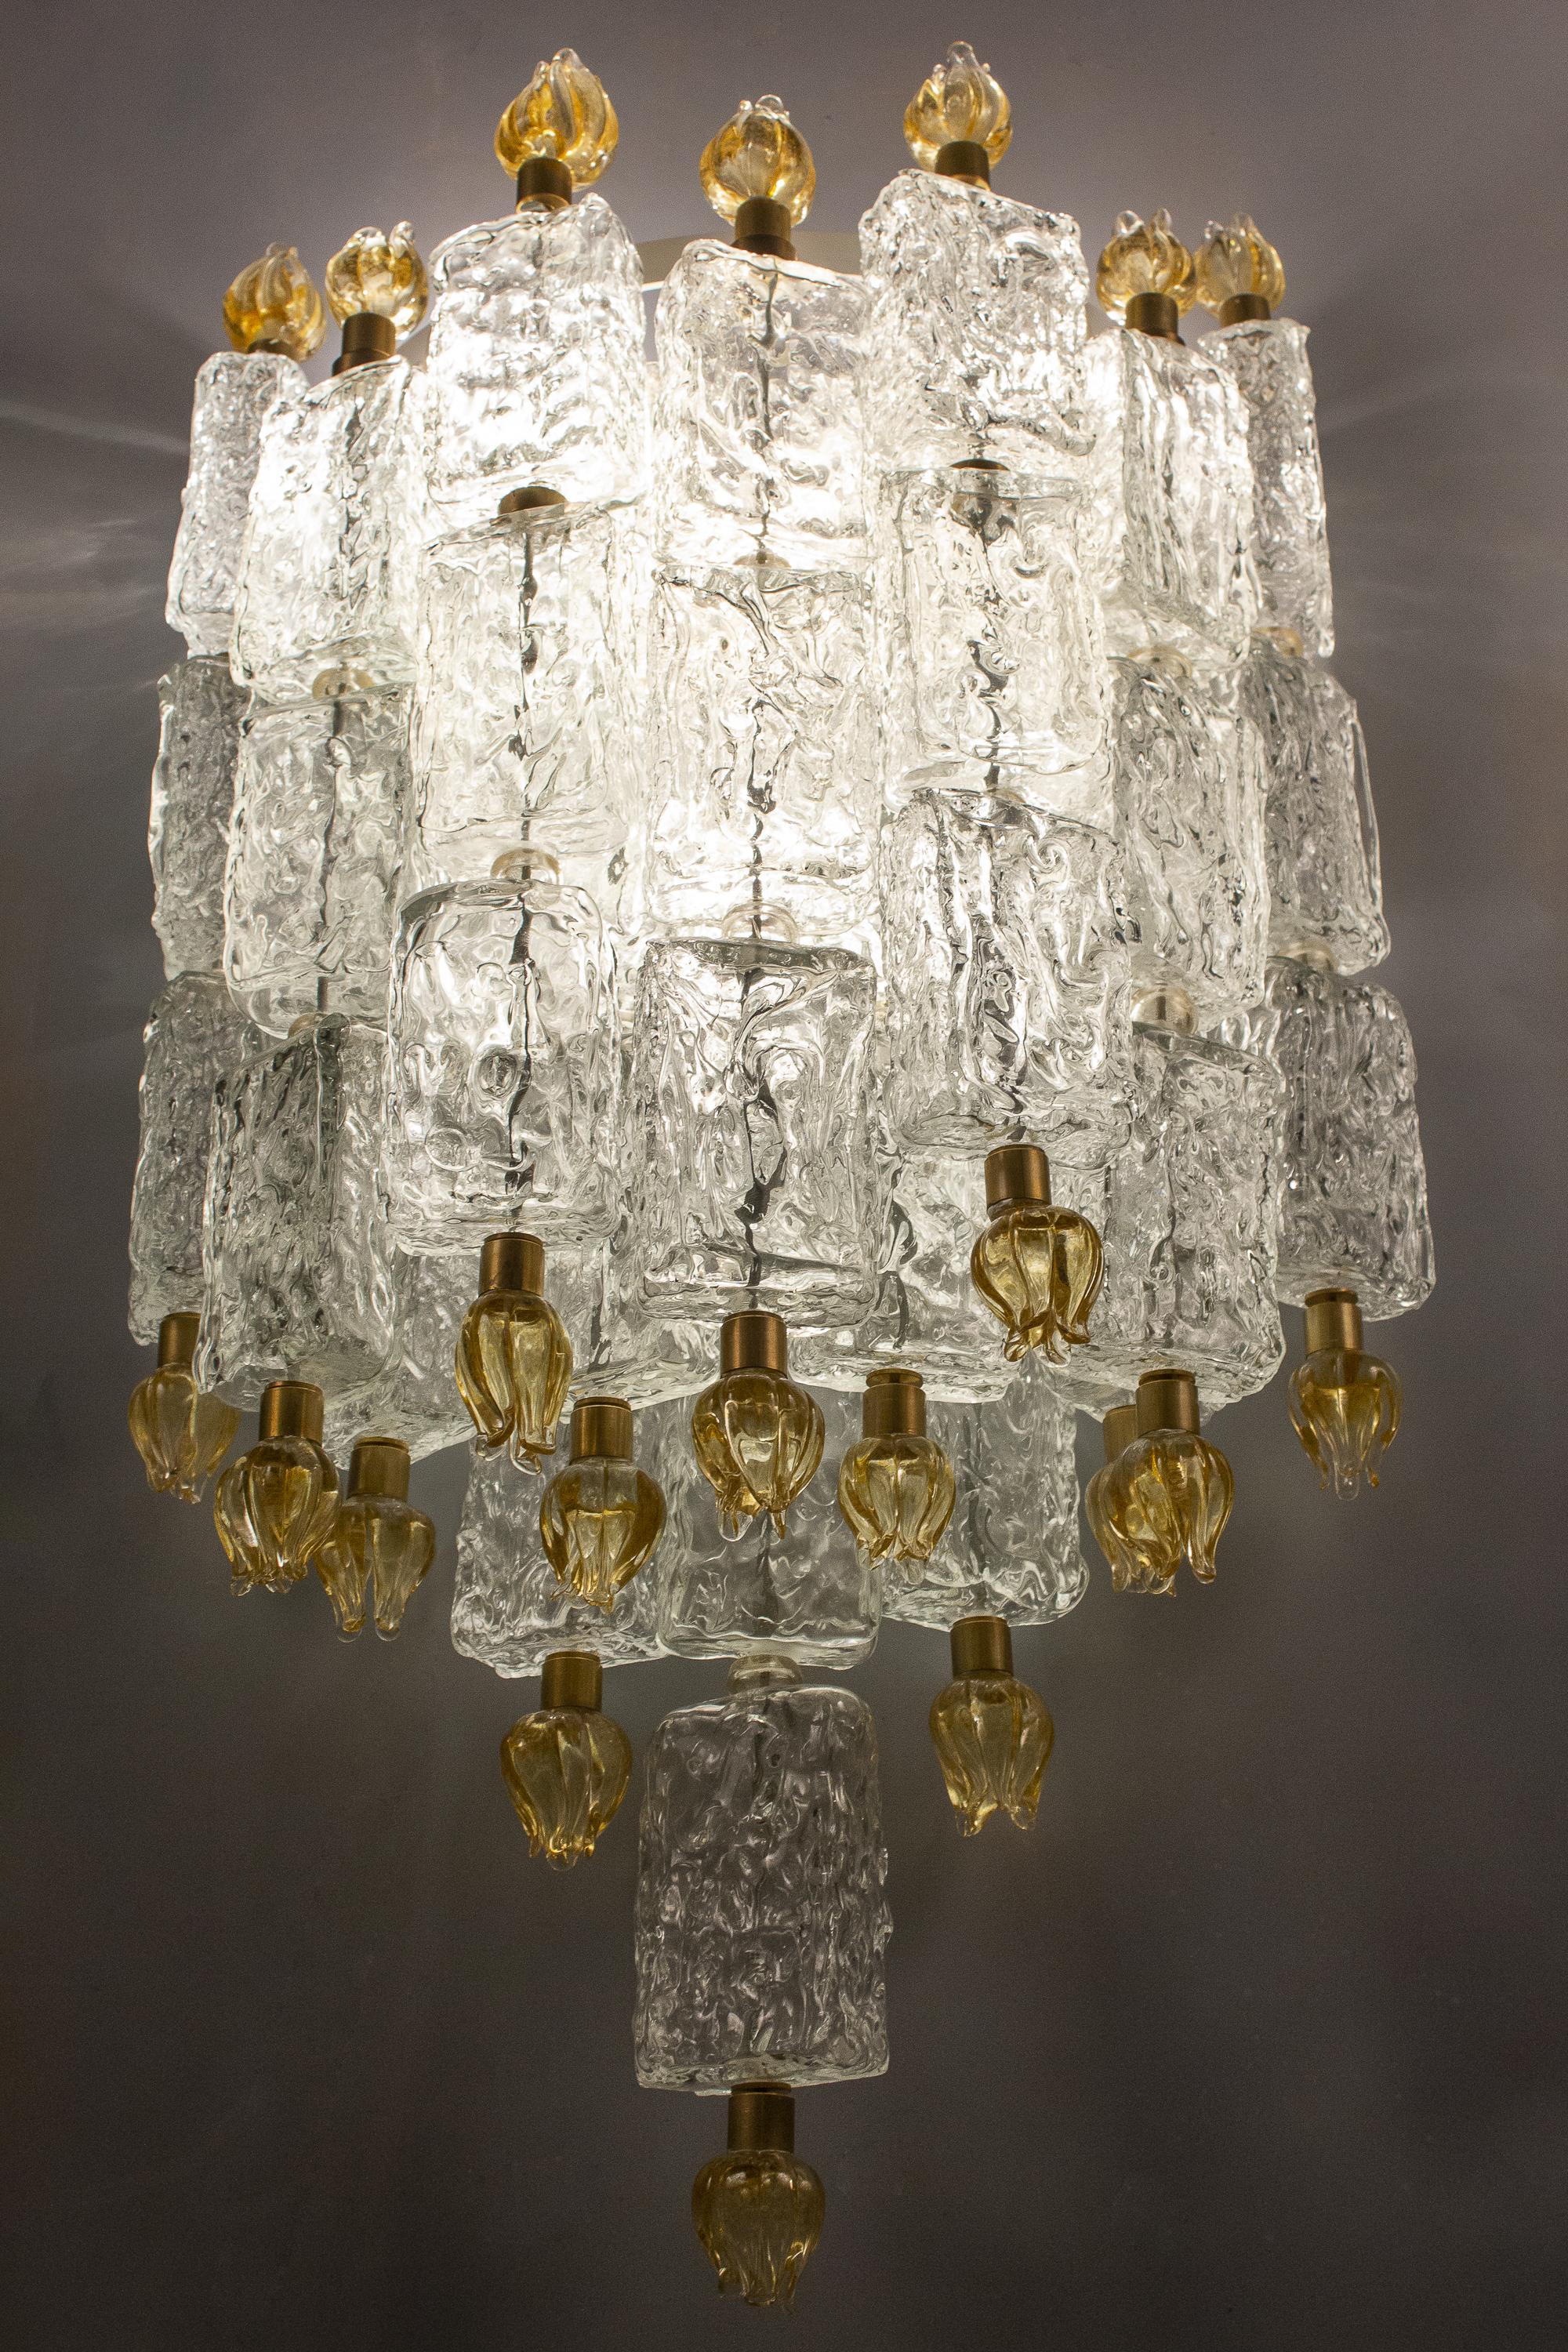 Italian Pair of Barovier & Toso Glass Blocks with Gold Tulip Sconces, 1940 For Sale